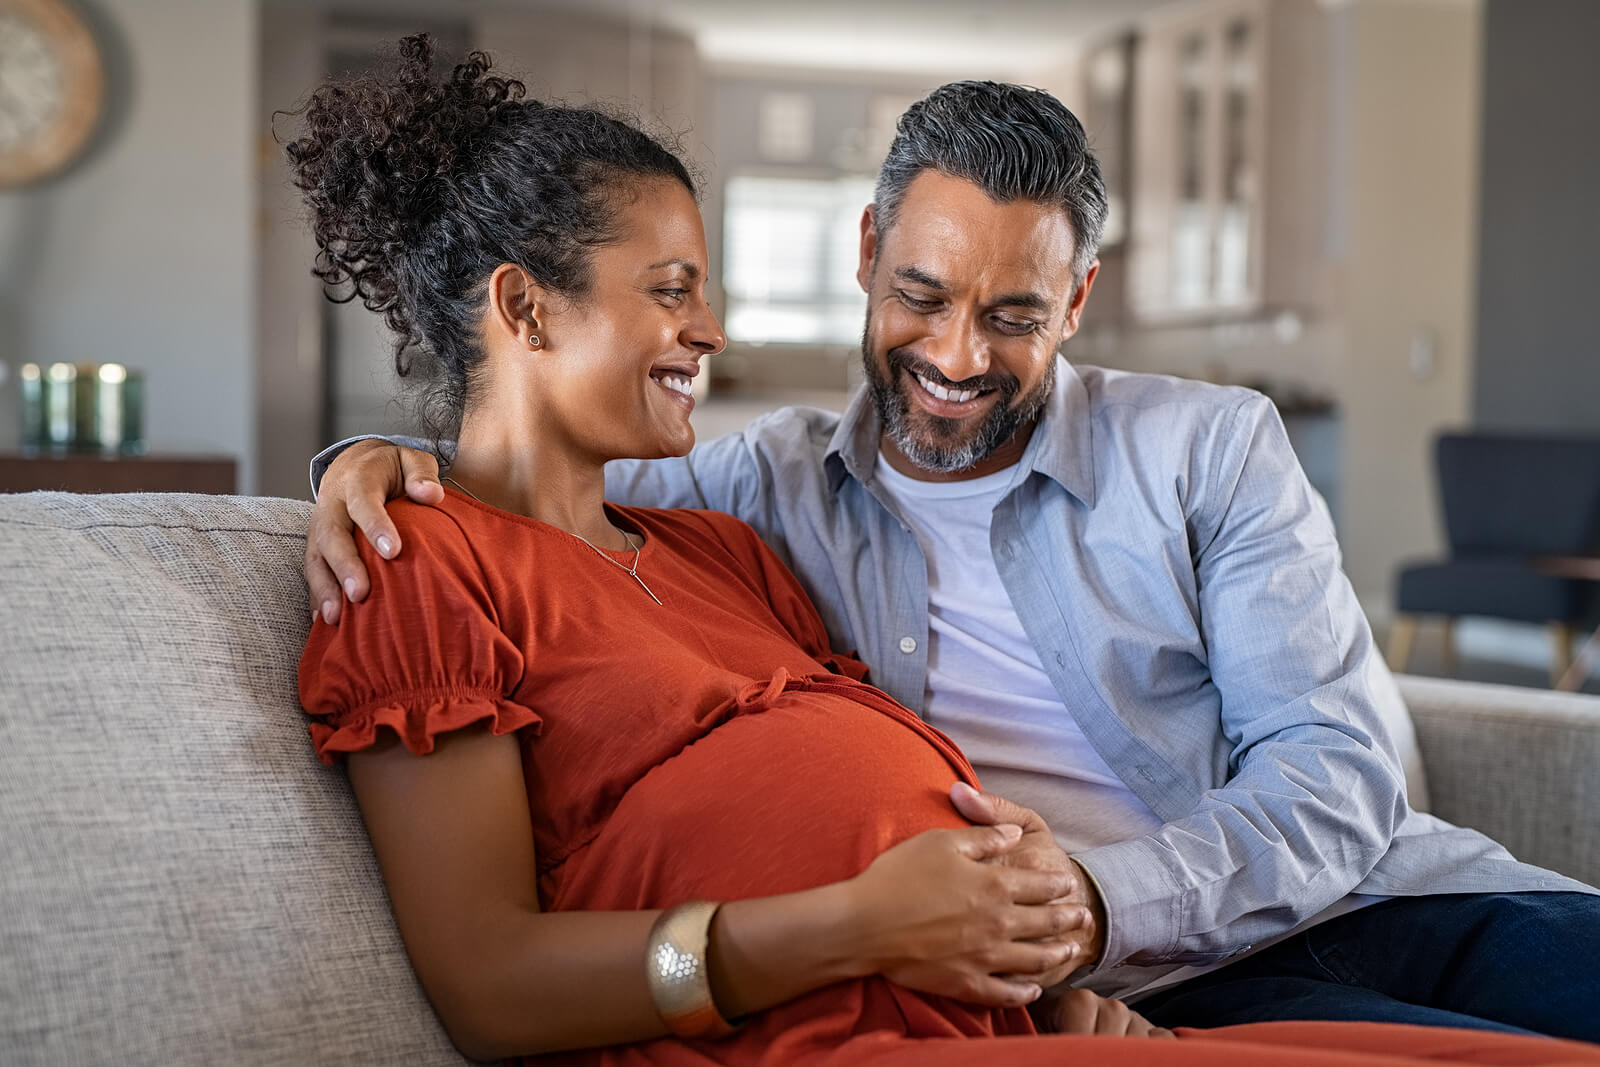 A smiling man and woman with their hands on the woman's pregnant belly.